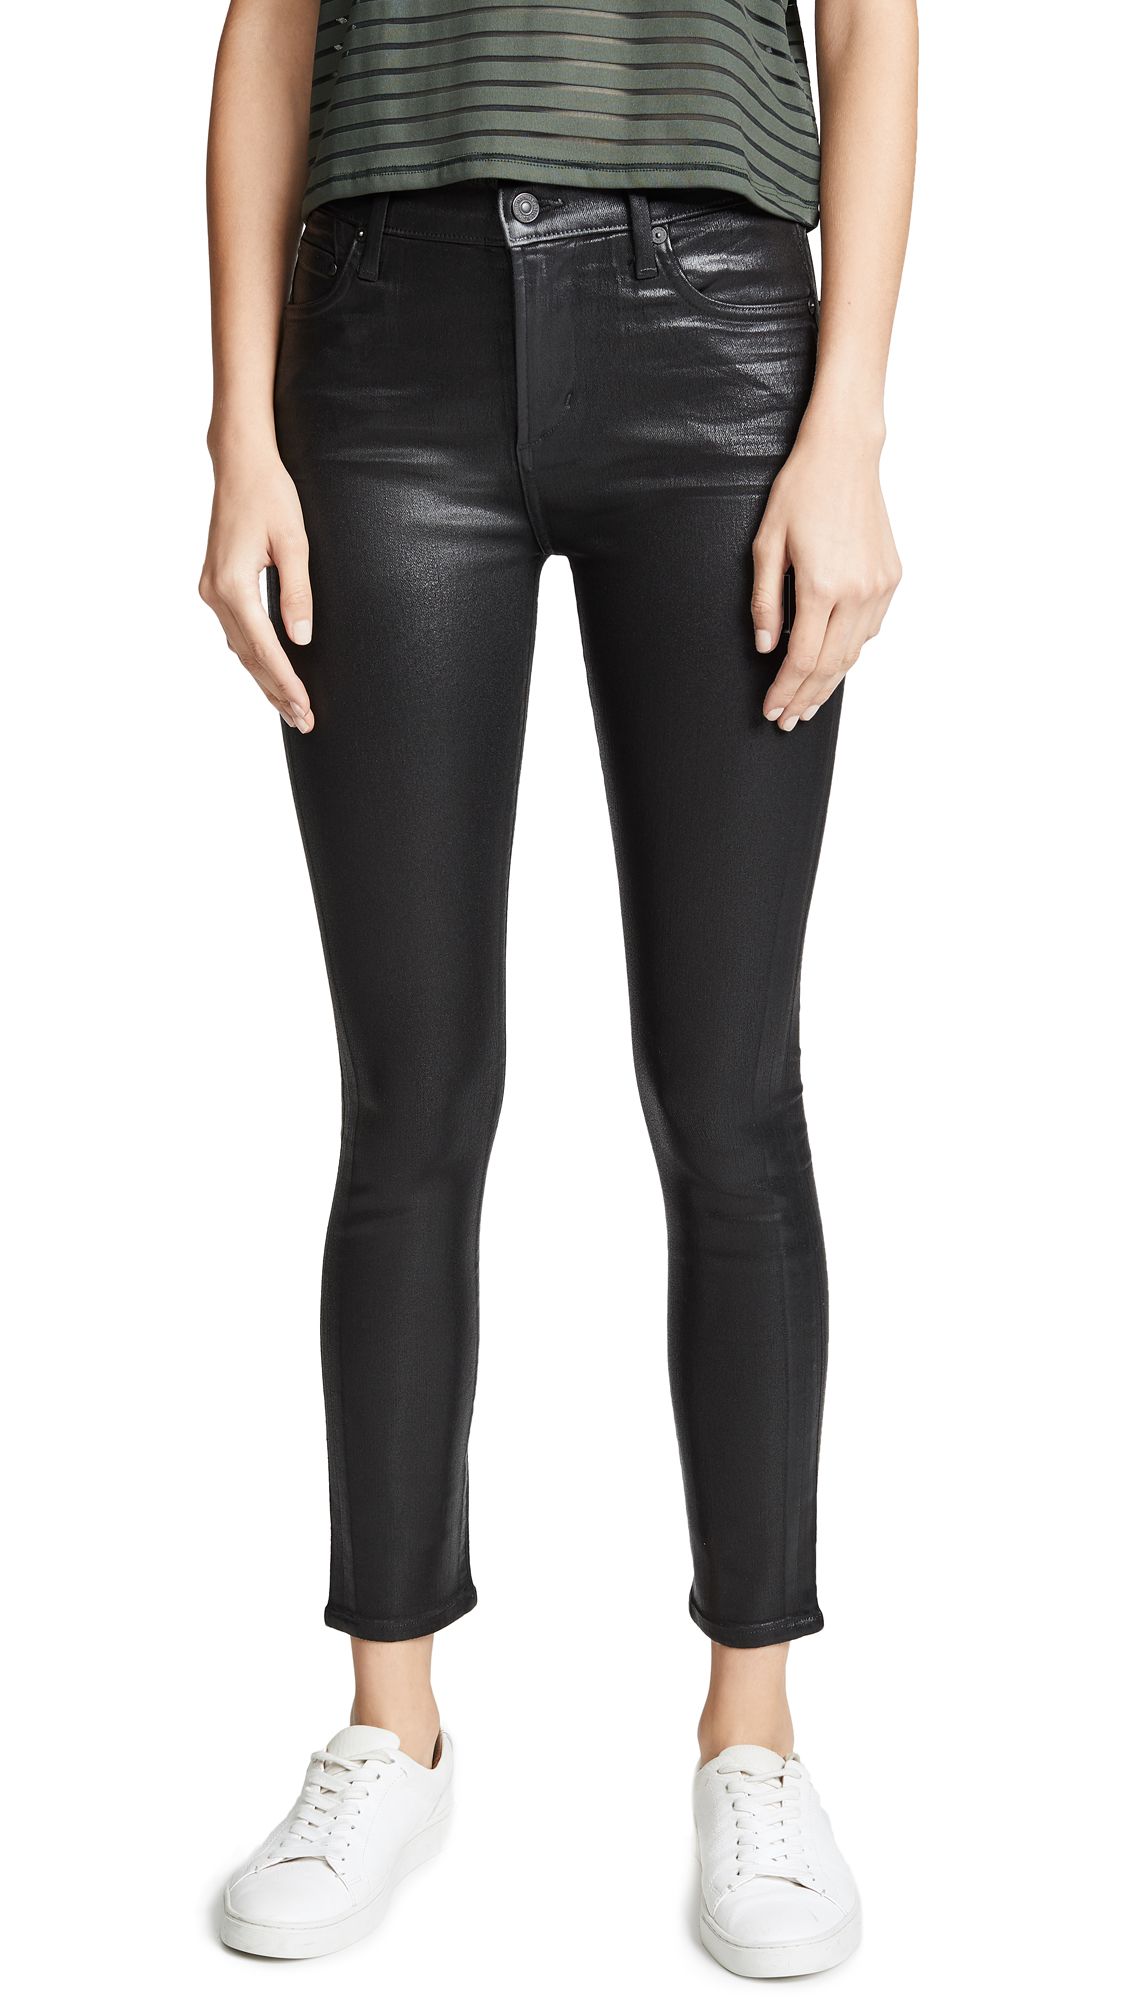 Citizens of Humanity Rocket Leatherette High Rise Skinny Jeans | Shopbop